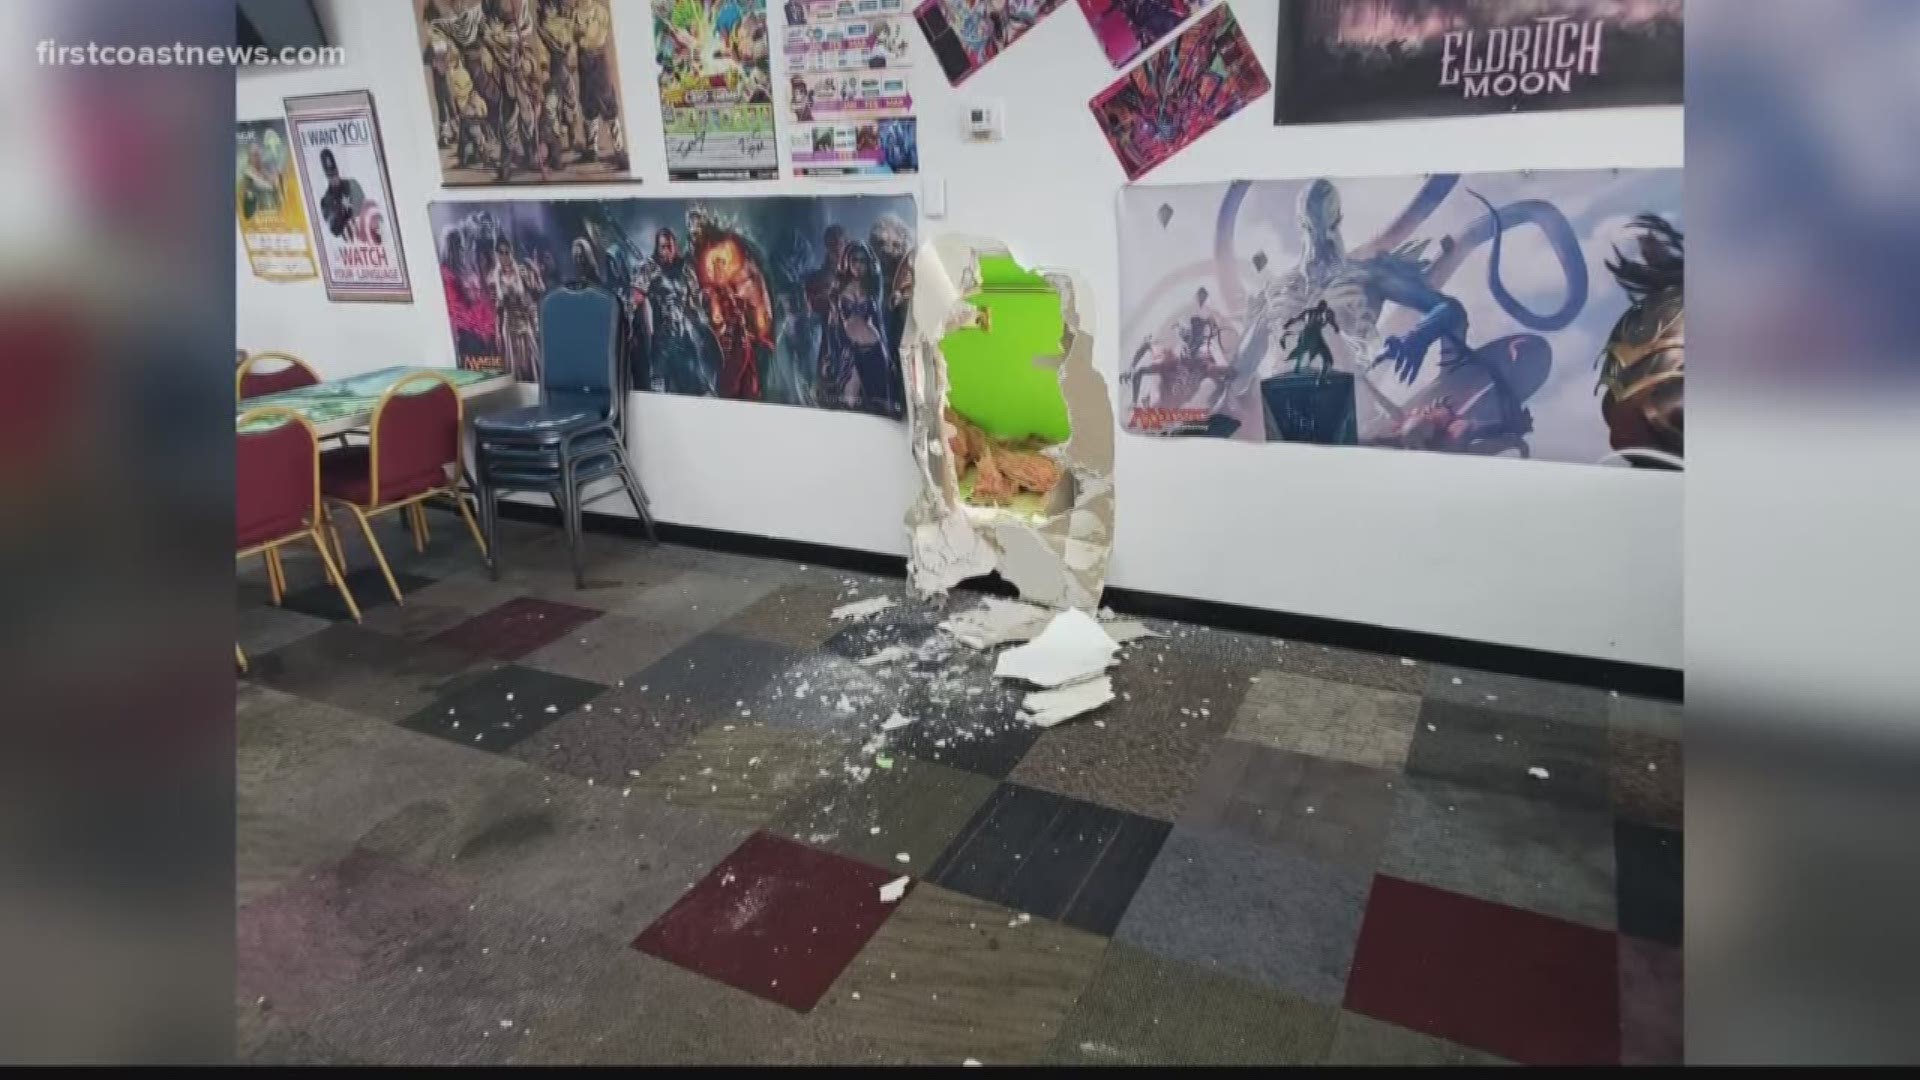 The thief broke into the game center by punching a large hole from inside the neighboring Chinese restaurant.